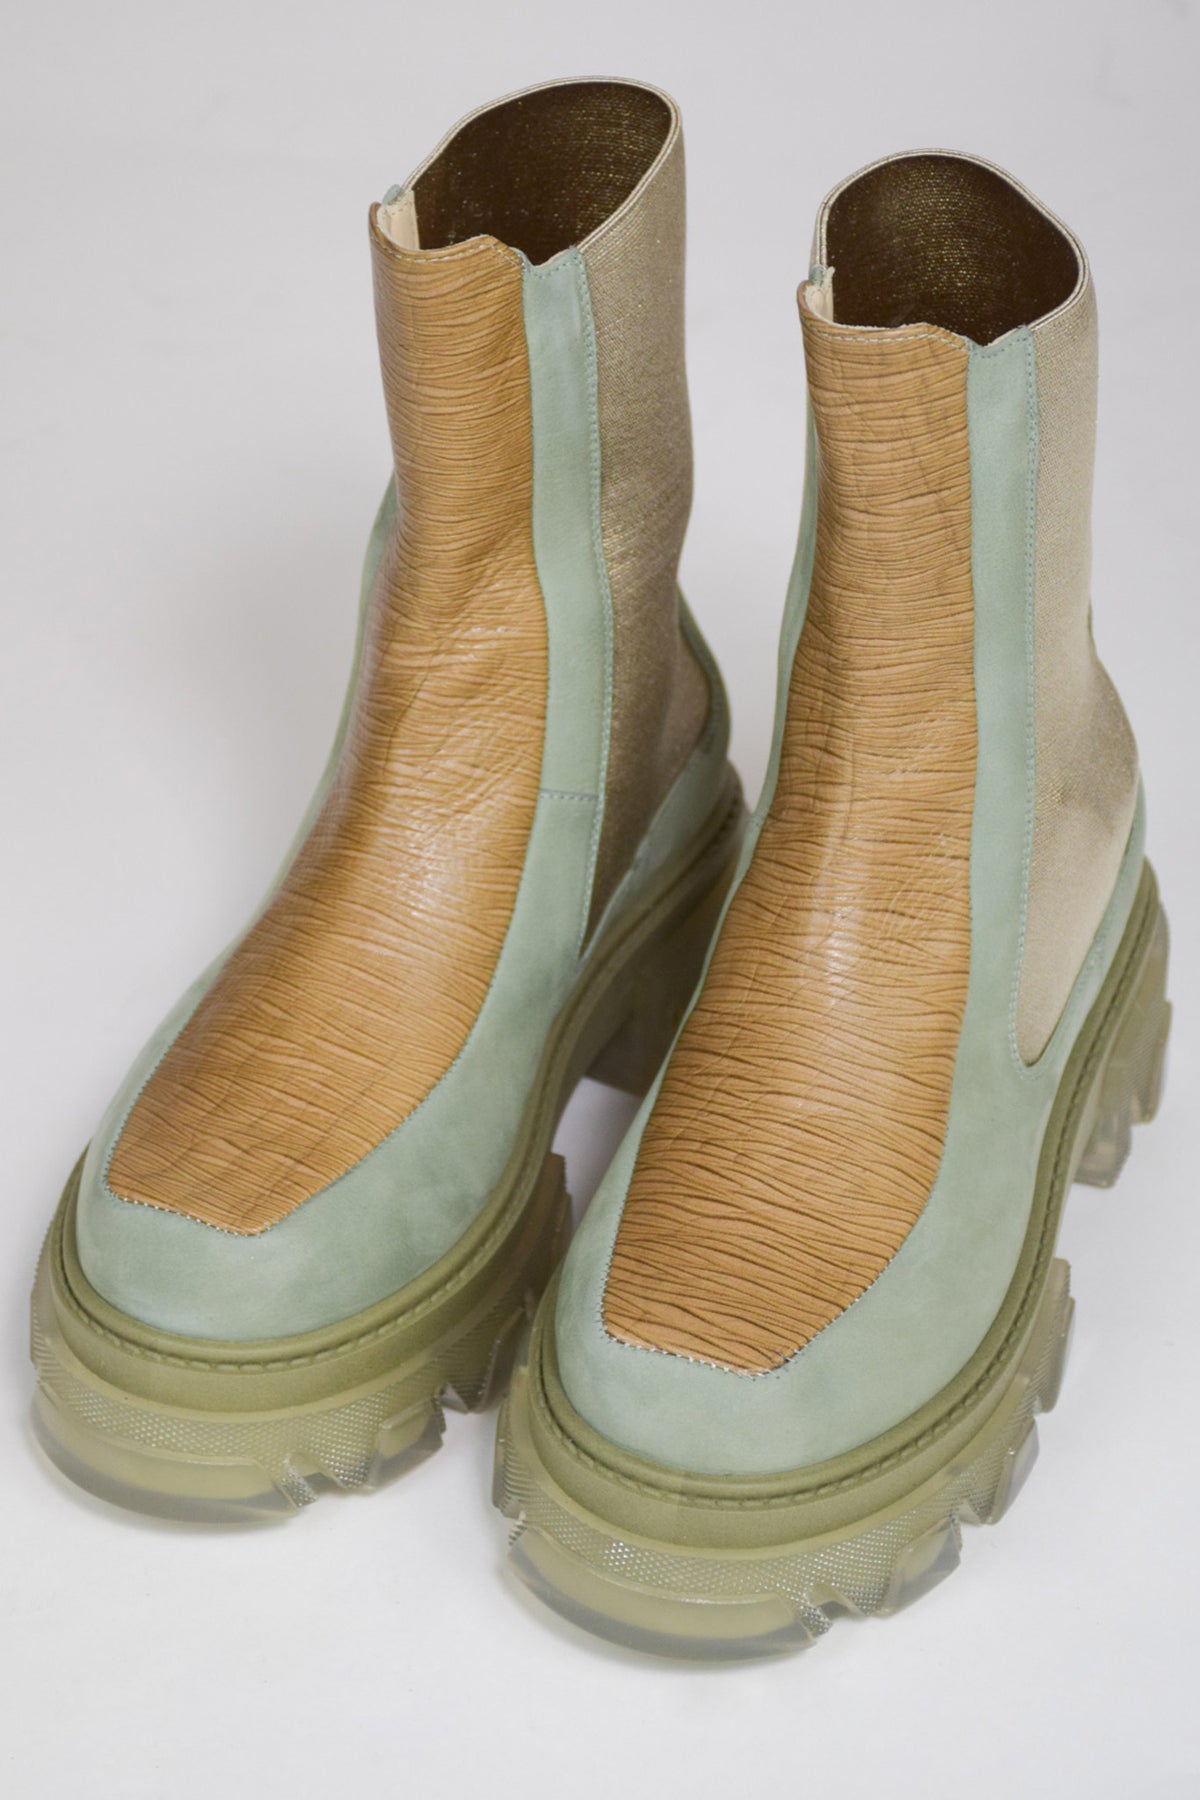 BOOTS WITH SERIGRAPH INSERTS AND HALF TRANSPARENT SOLES